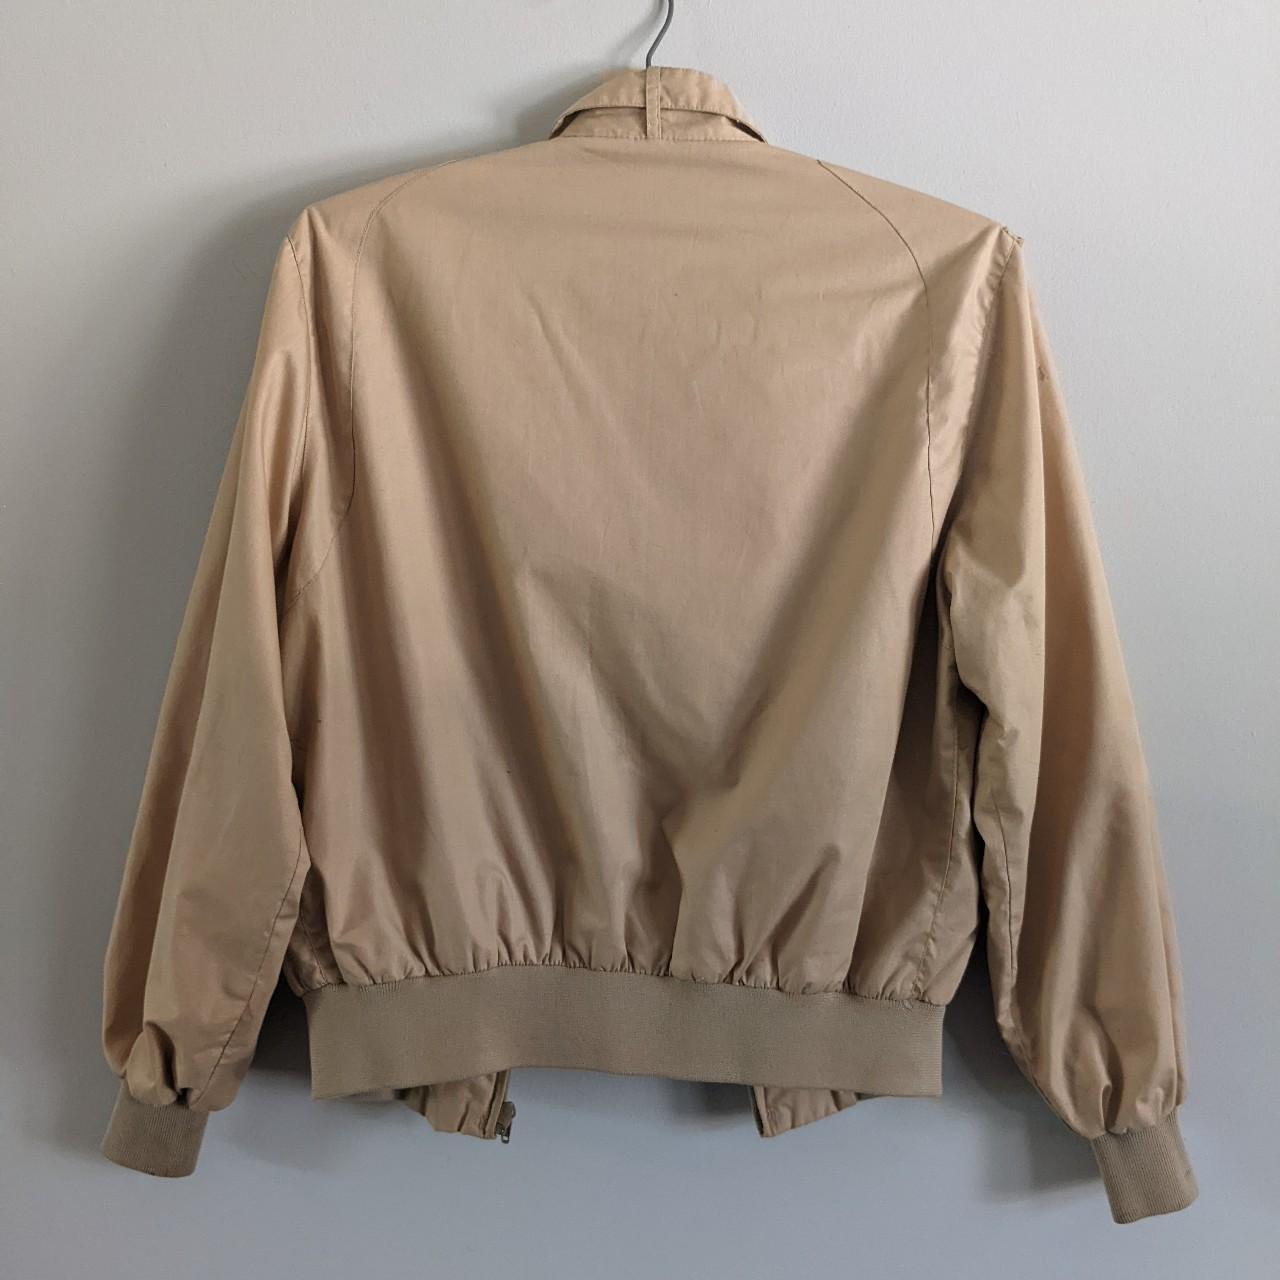 Members Only Women's Tan and Cream Jacket (2)